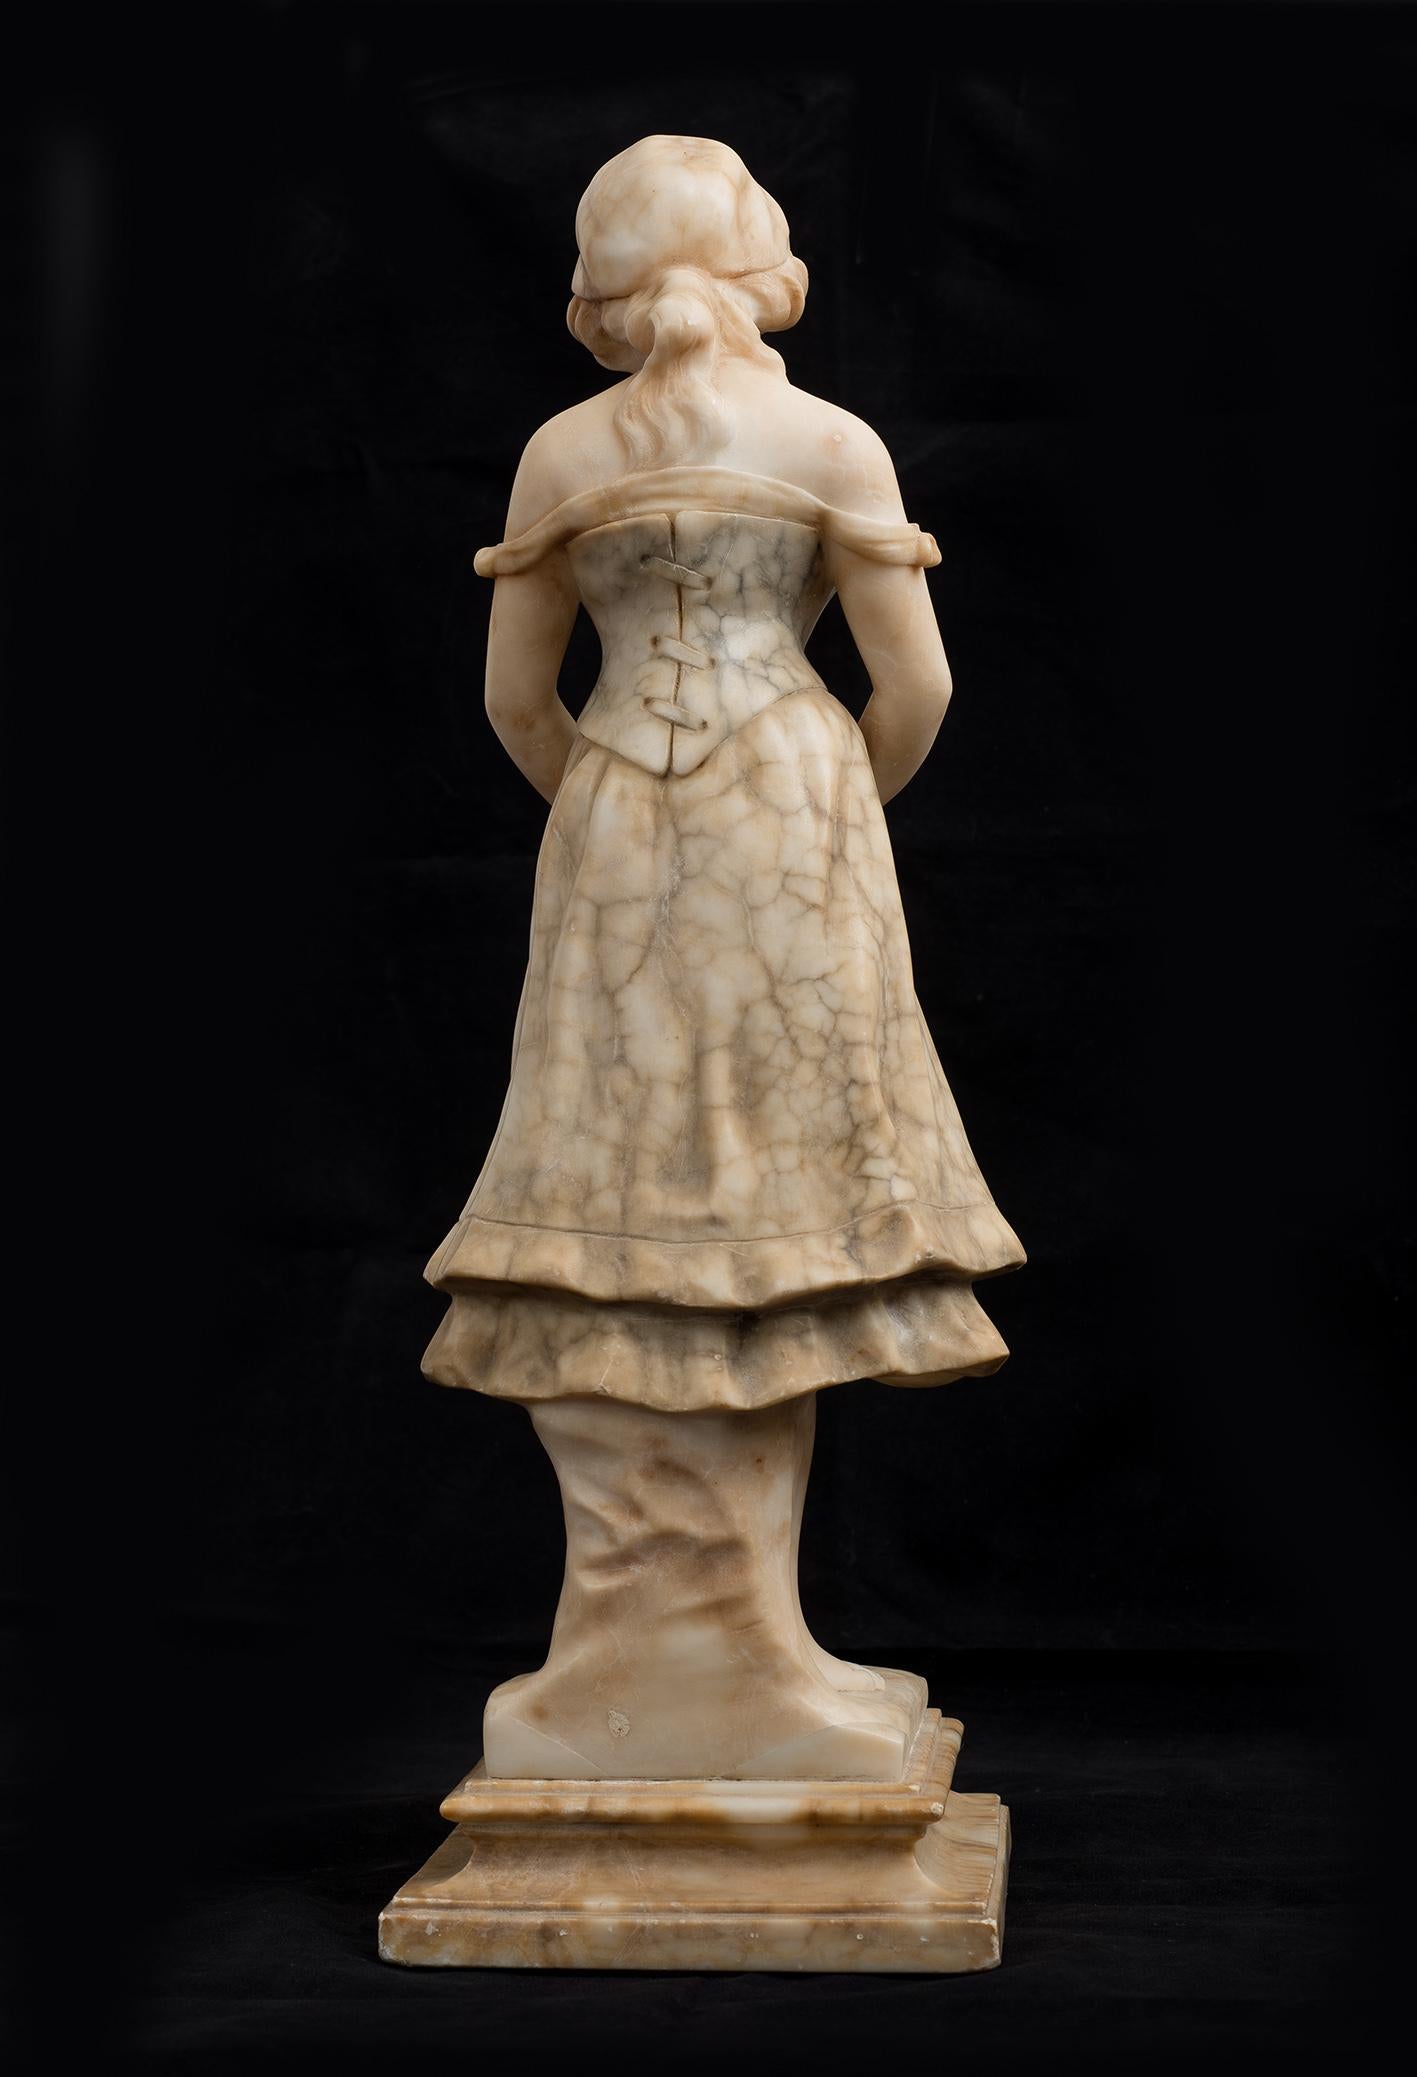 Antique alabaster sculpture French Napoleon III belonging to the second half of the 19th century.

The woman is depicted in period clothing and hat while holding a bouquet of flowers.

Condition: Very good Condition.

Provenance: 19th-century